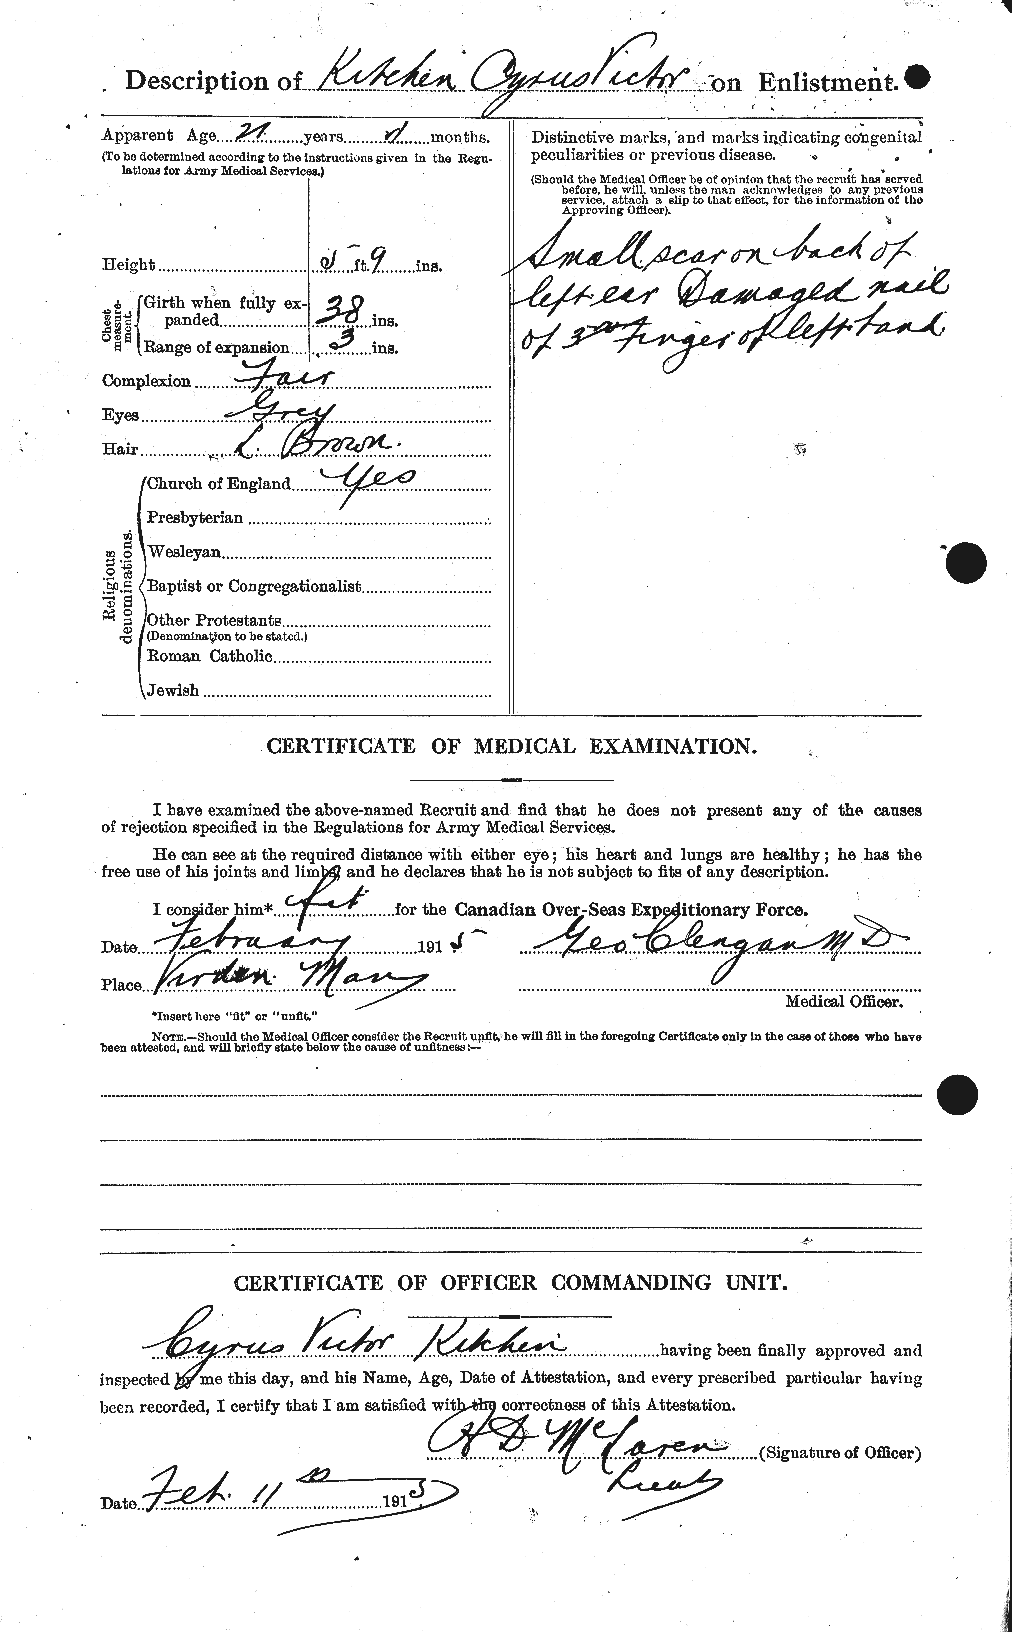 Personnel Records of the First World War - CEF 438459b